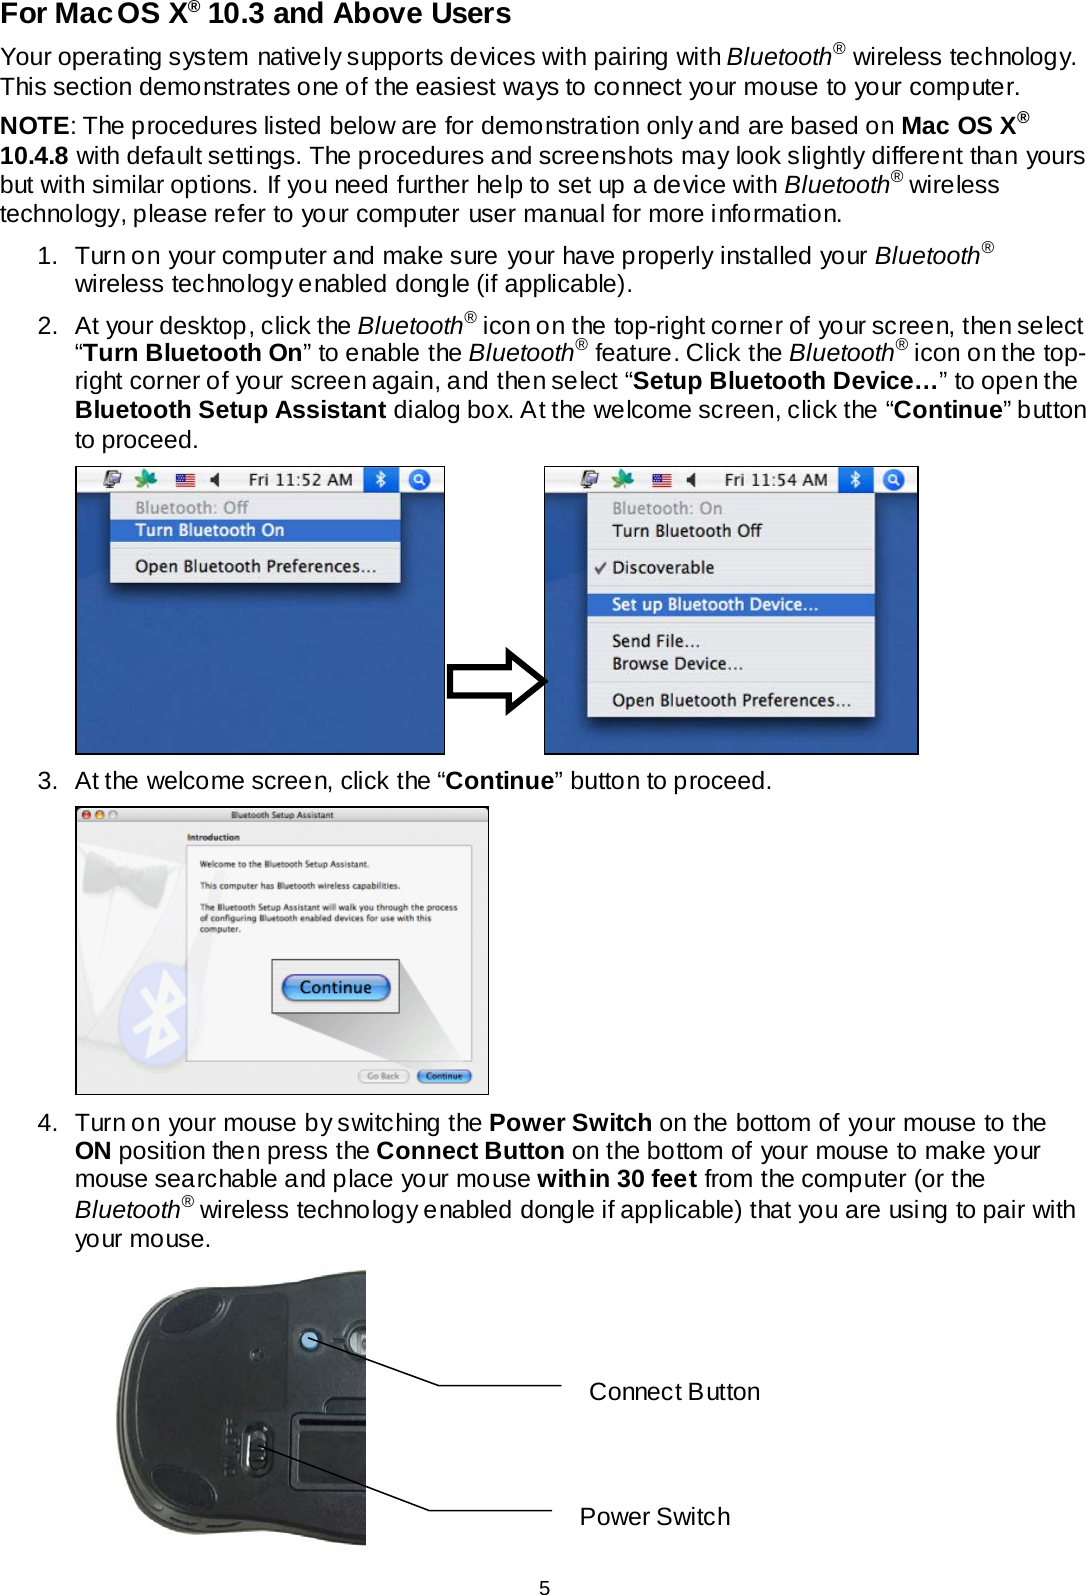 For Mac OS X® 10.3 and Above Users Your operating system natively supports devices with pairing with Bluetooth® wireless technology. This section demonstrates one of the easiest ways to connect your mouse to your computer. NOTE: The procedures listed below are for demonstration only and are based on Mac OS X® 10.4.8 with default settings. The procedures and screenshots may look slightly different than yours but with similar options. If you need further help to set up a device with Bluetooth® wireless technology, please refer to your computer user manual for more information. 1. Turn on your computer and make sure your have properly installed your Bluetooth® wireless technology enabled dongle (if applicable). 2. At your desktop, click the Bluetooth® icon on the top-right corner of your screen, then select “Turn Bluetooth On” to enable the Bluetooth® feature. Click the Bluetooth® icon on the top-right corner of your screen again, and then select “Setup Bluetooth Device…” to open the Bluetooth Setup Assistant dialog box. At the welcome screen, click the “Continue” button to proceed.    3. At the welcome screen, click the “Continue” button to proceed.    4. Turn on your mouse by switching the Power Switch on the bottom of your mouse to the ON position then press the Connect Button on the bottom of your mouse to make your mouse searchable and place your mouse within 30 feet from the computer (or the Bluetooth® wireless technology enabled dongle if applicable) that you are using to pair with your mouse.  Power Switch Connect B utton 5 